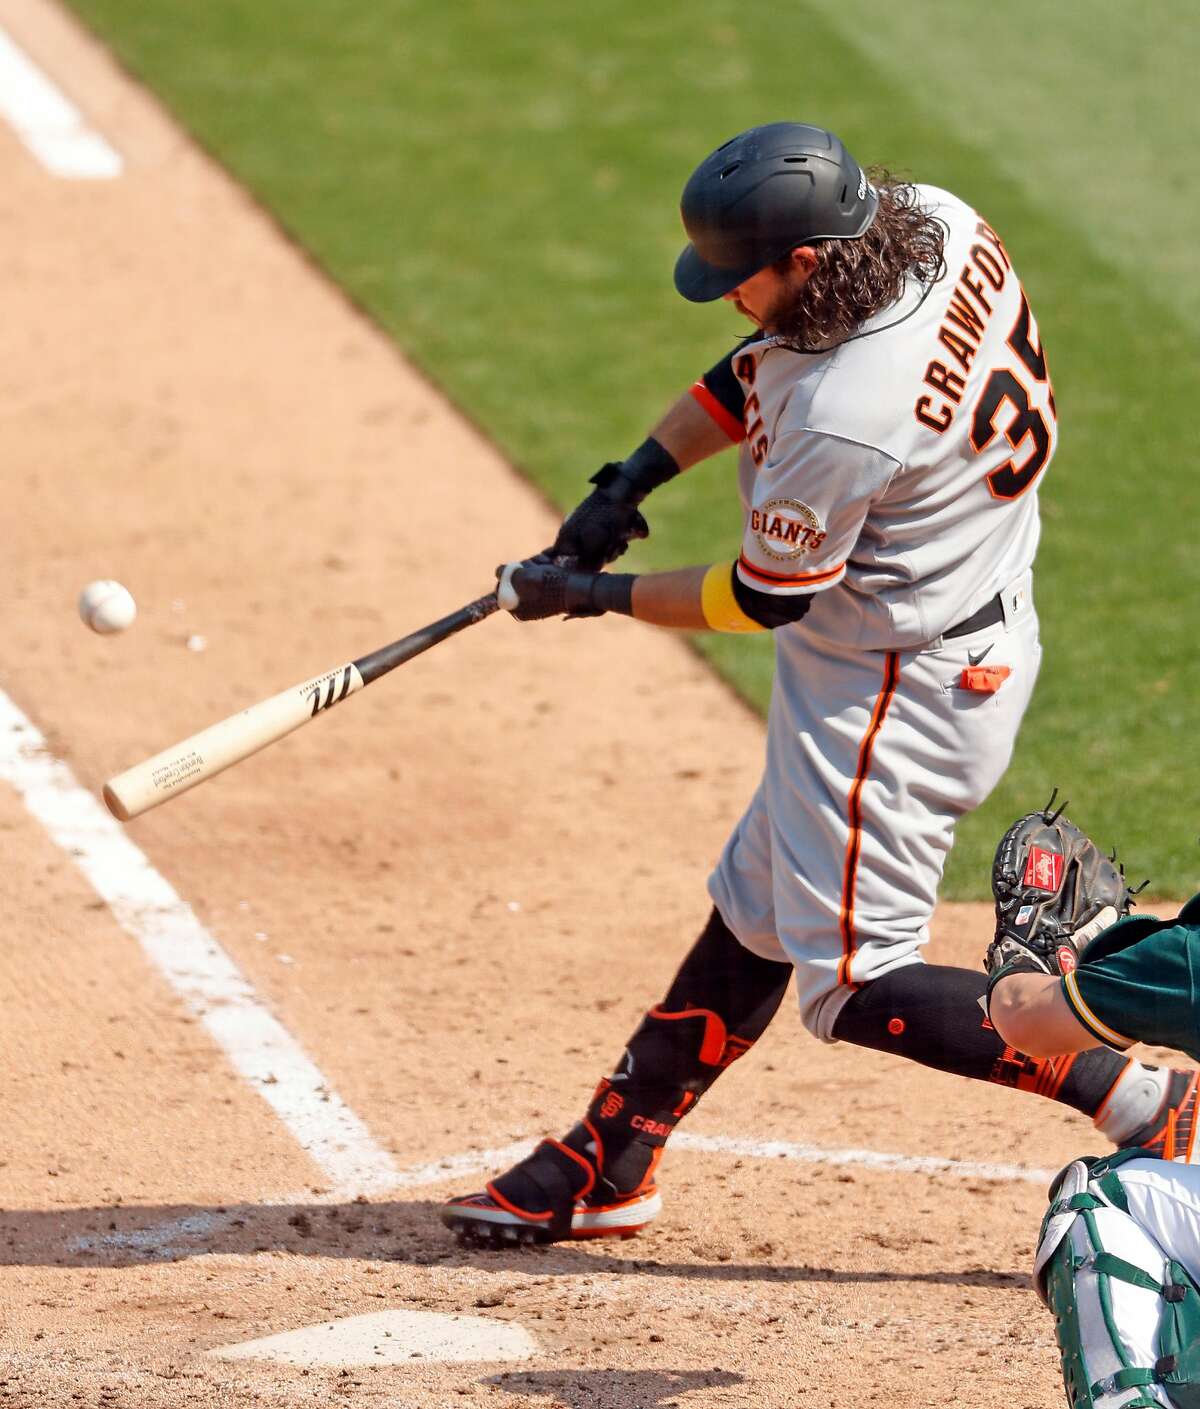 San Francisco Giants' Brandon Crawford connects on a 6th inning grand slam against Oakland Athletics in MLB game at Oakland Coliseum in Oakland, Calif., on Sunday, September 20, 2020.